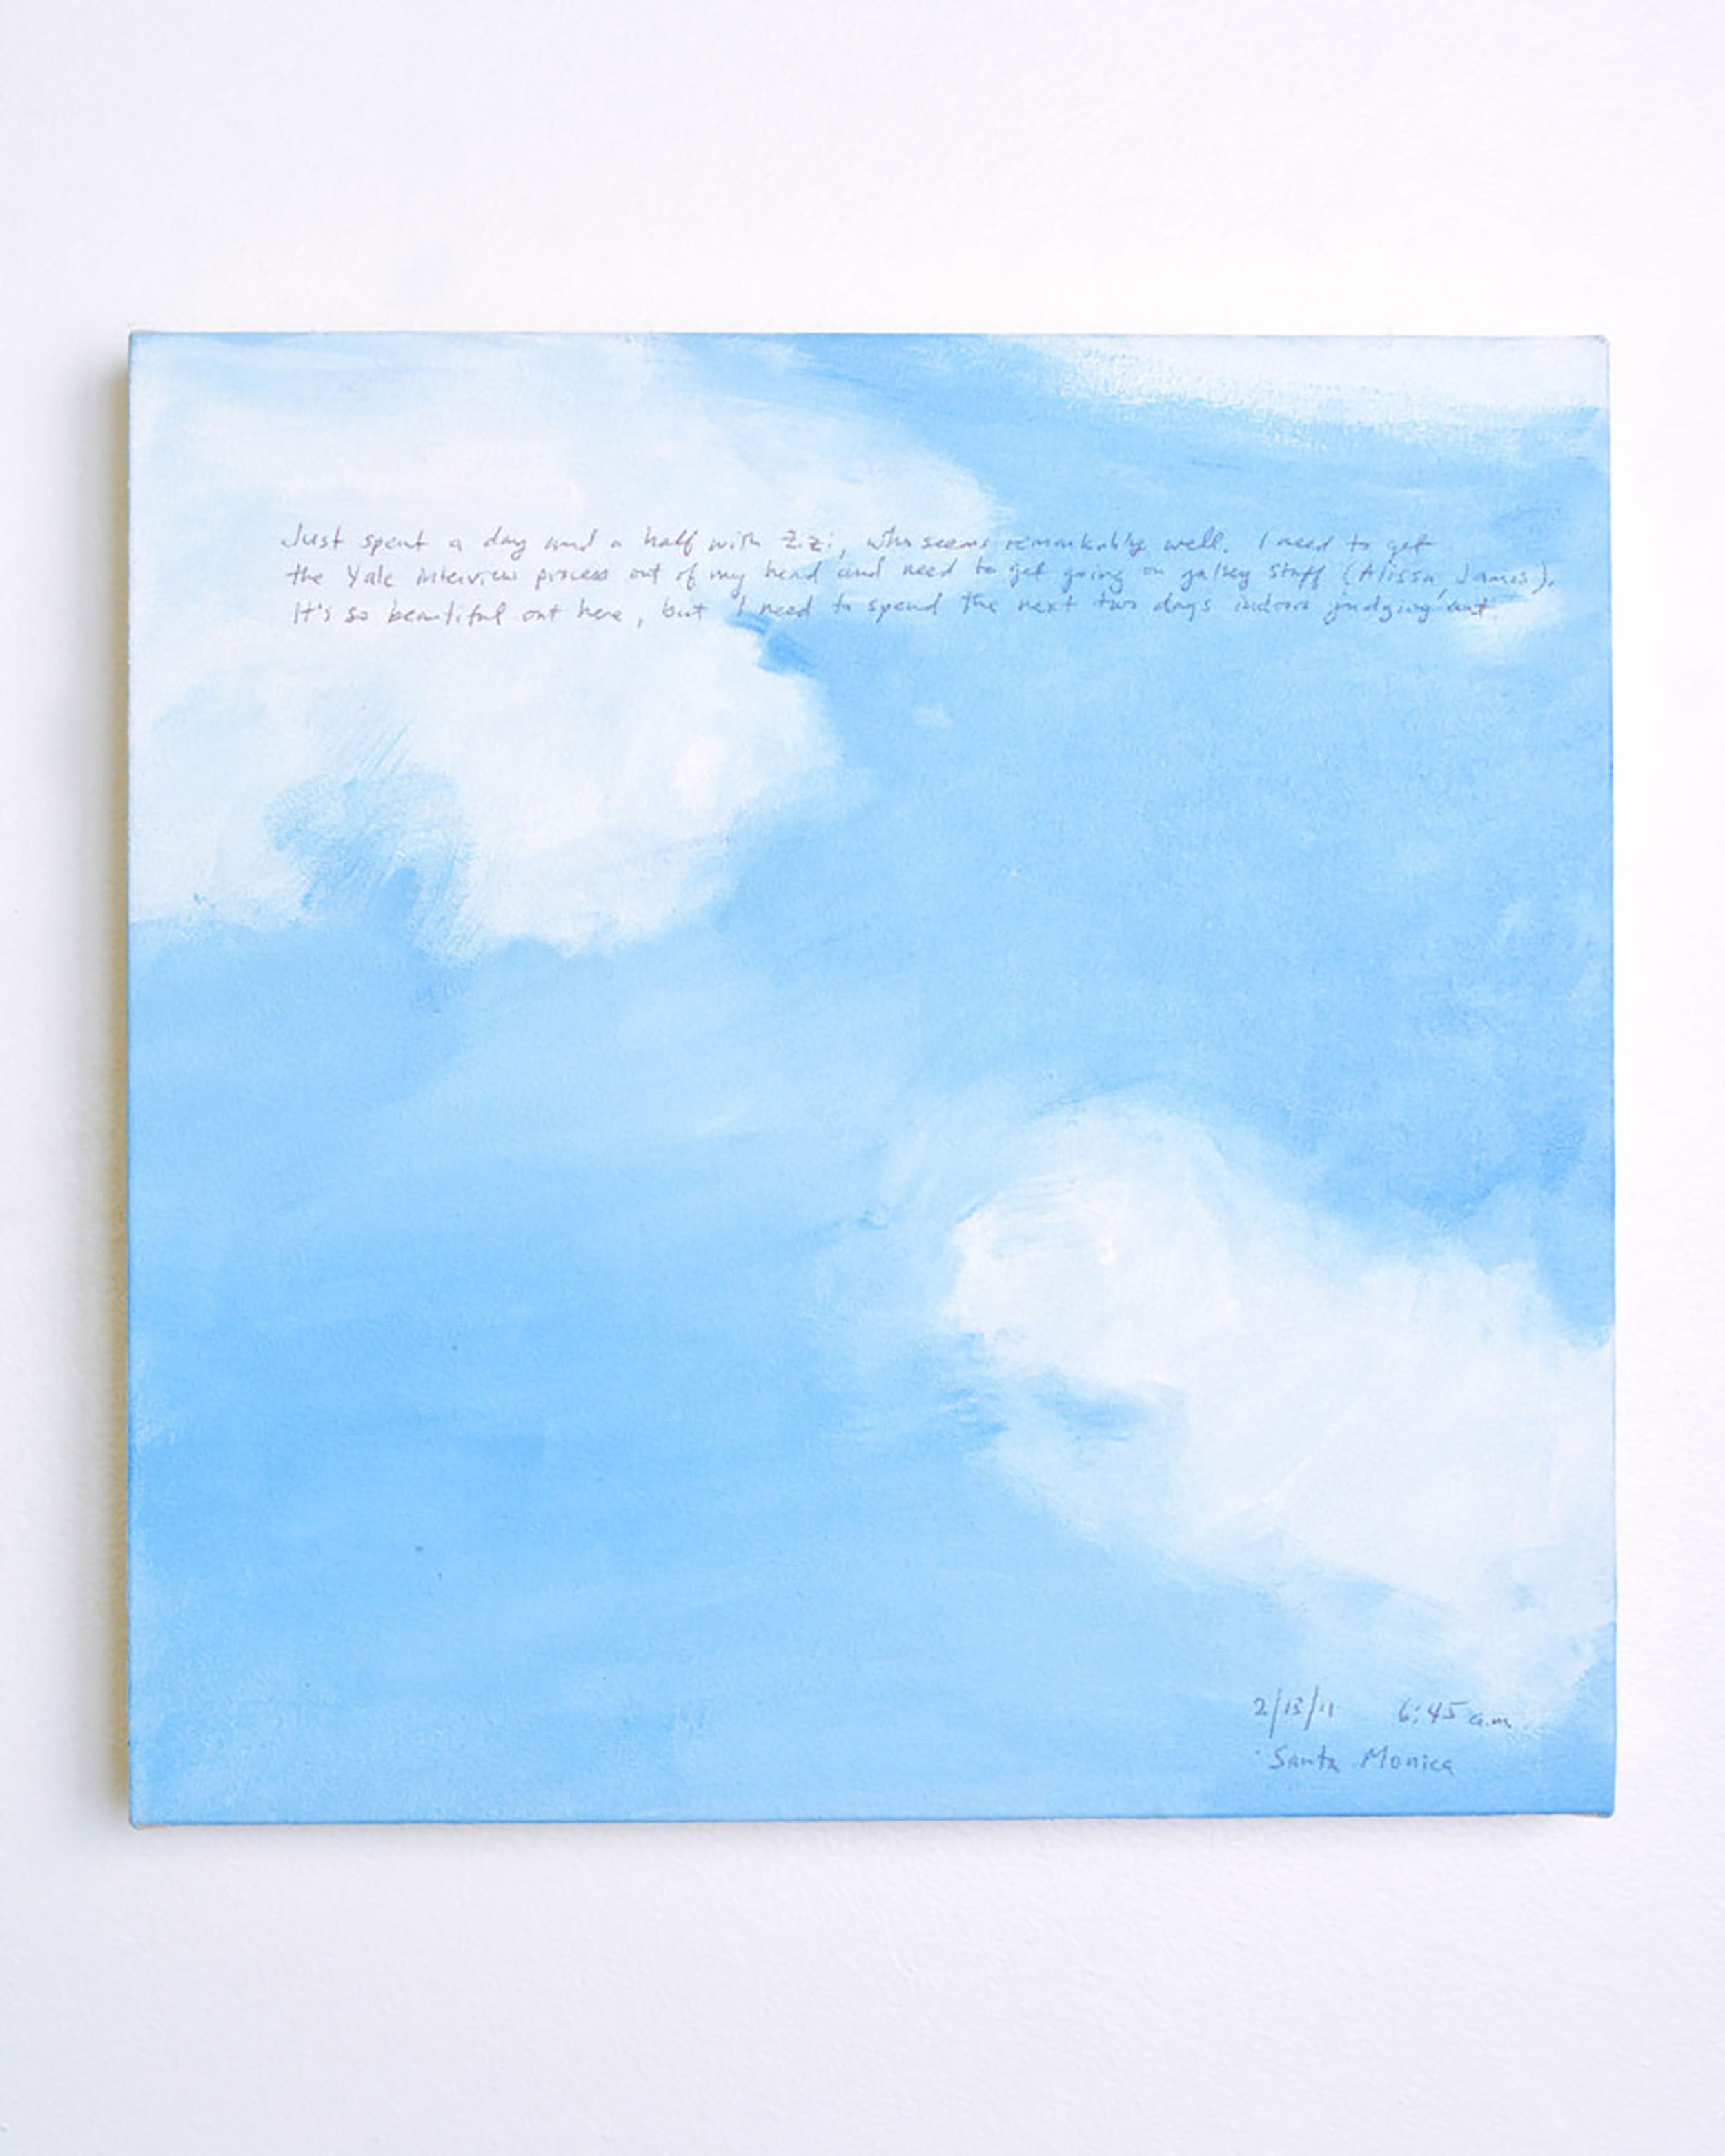 A 14 × 14 inch, acrylic painting of the sky. A journal entry is handwritten on the painting:

“Just spent a day and a half with Zizi, who seems remarkably well.  I need to get the Yale interview process out of my head and need to get going on gallery stuff (Alissa, James).  It’s so beautiful out here, but I need to spend the next two days indoors judging art.

2/13/11 6:45 am
Santa Monica”